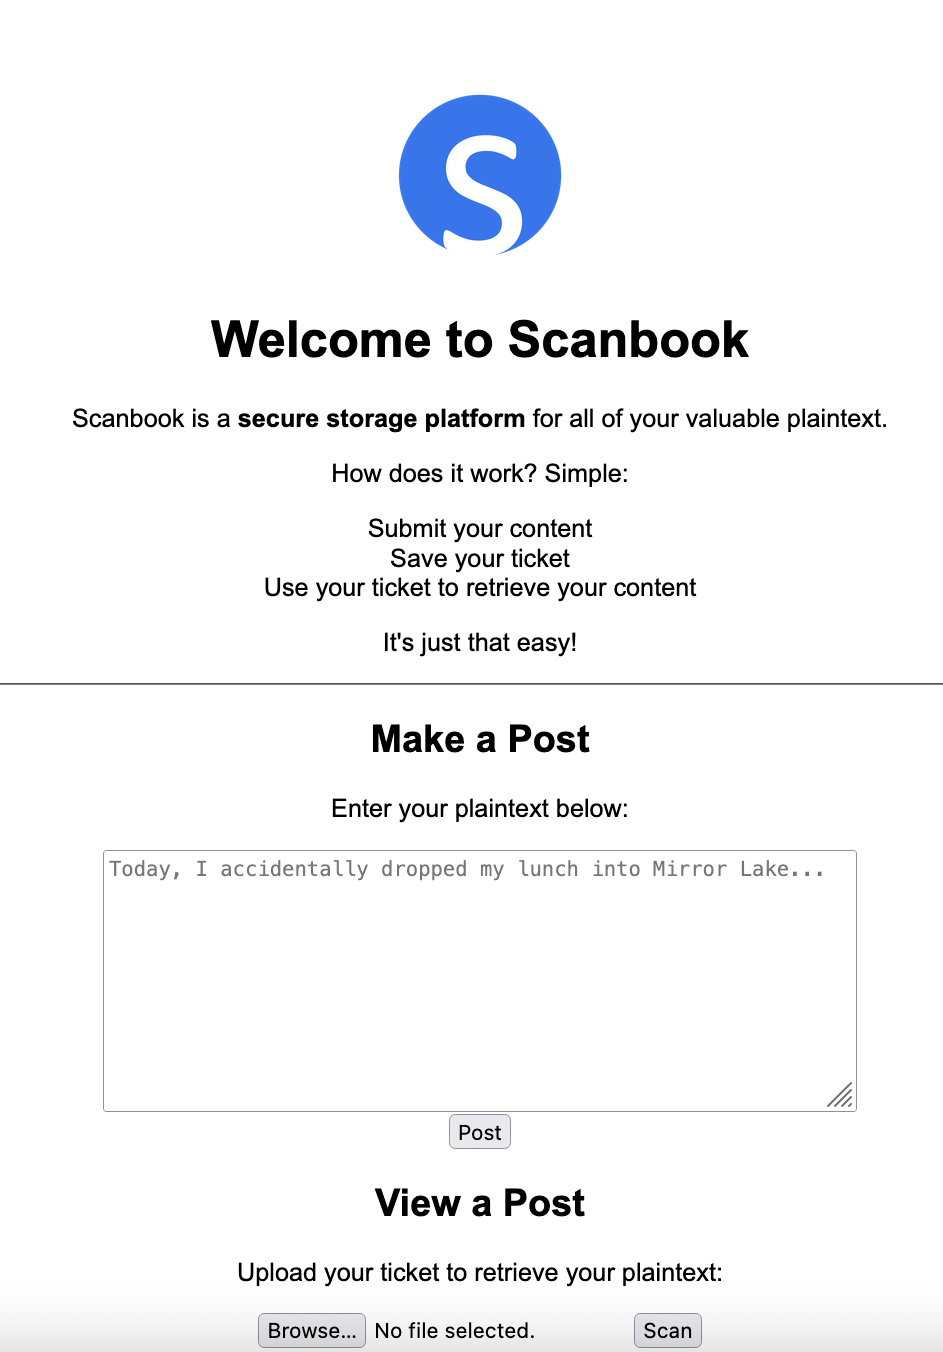 scanbook website which contains a plaintext input form and file upload feature for QR codes